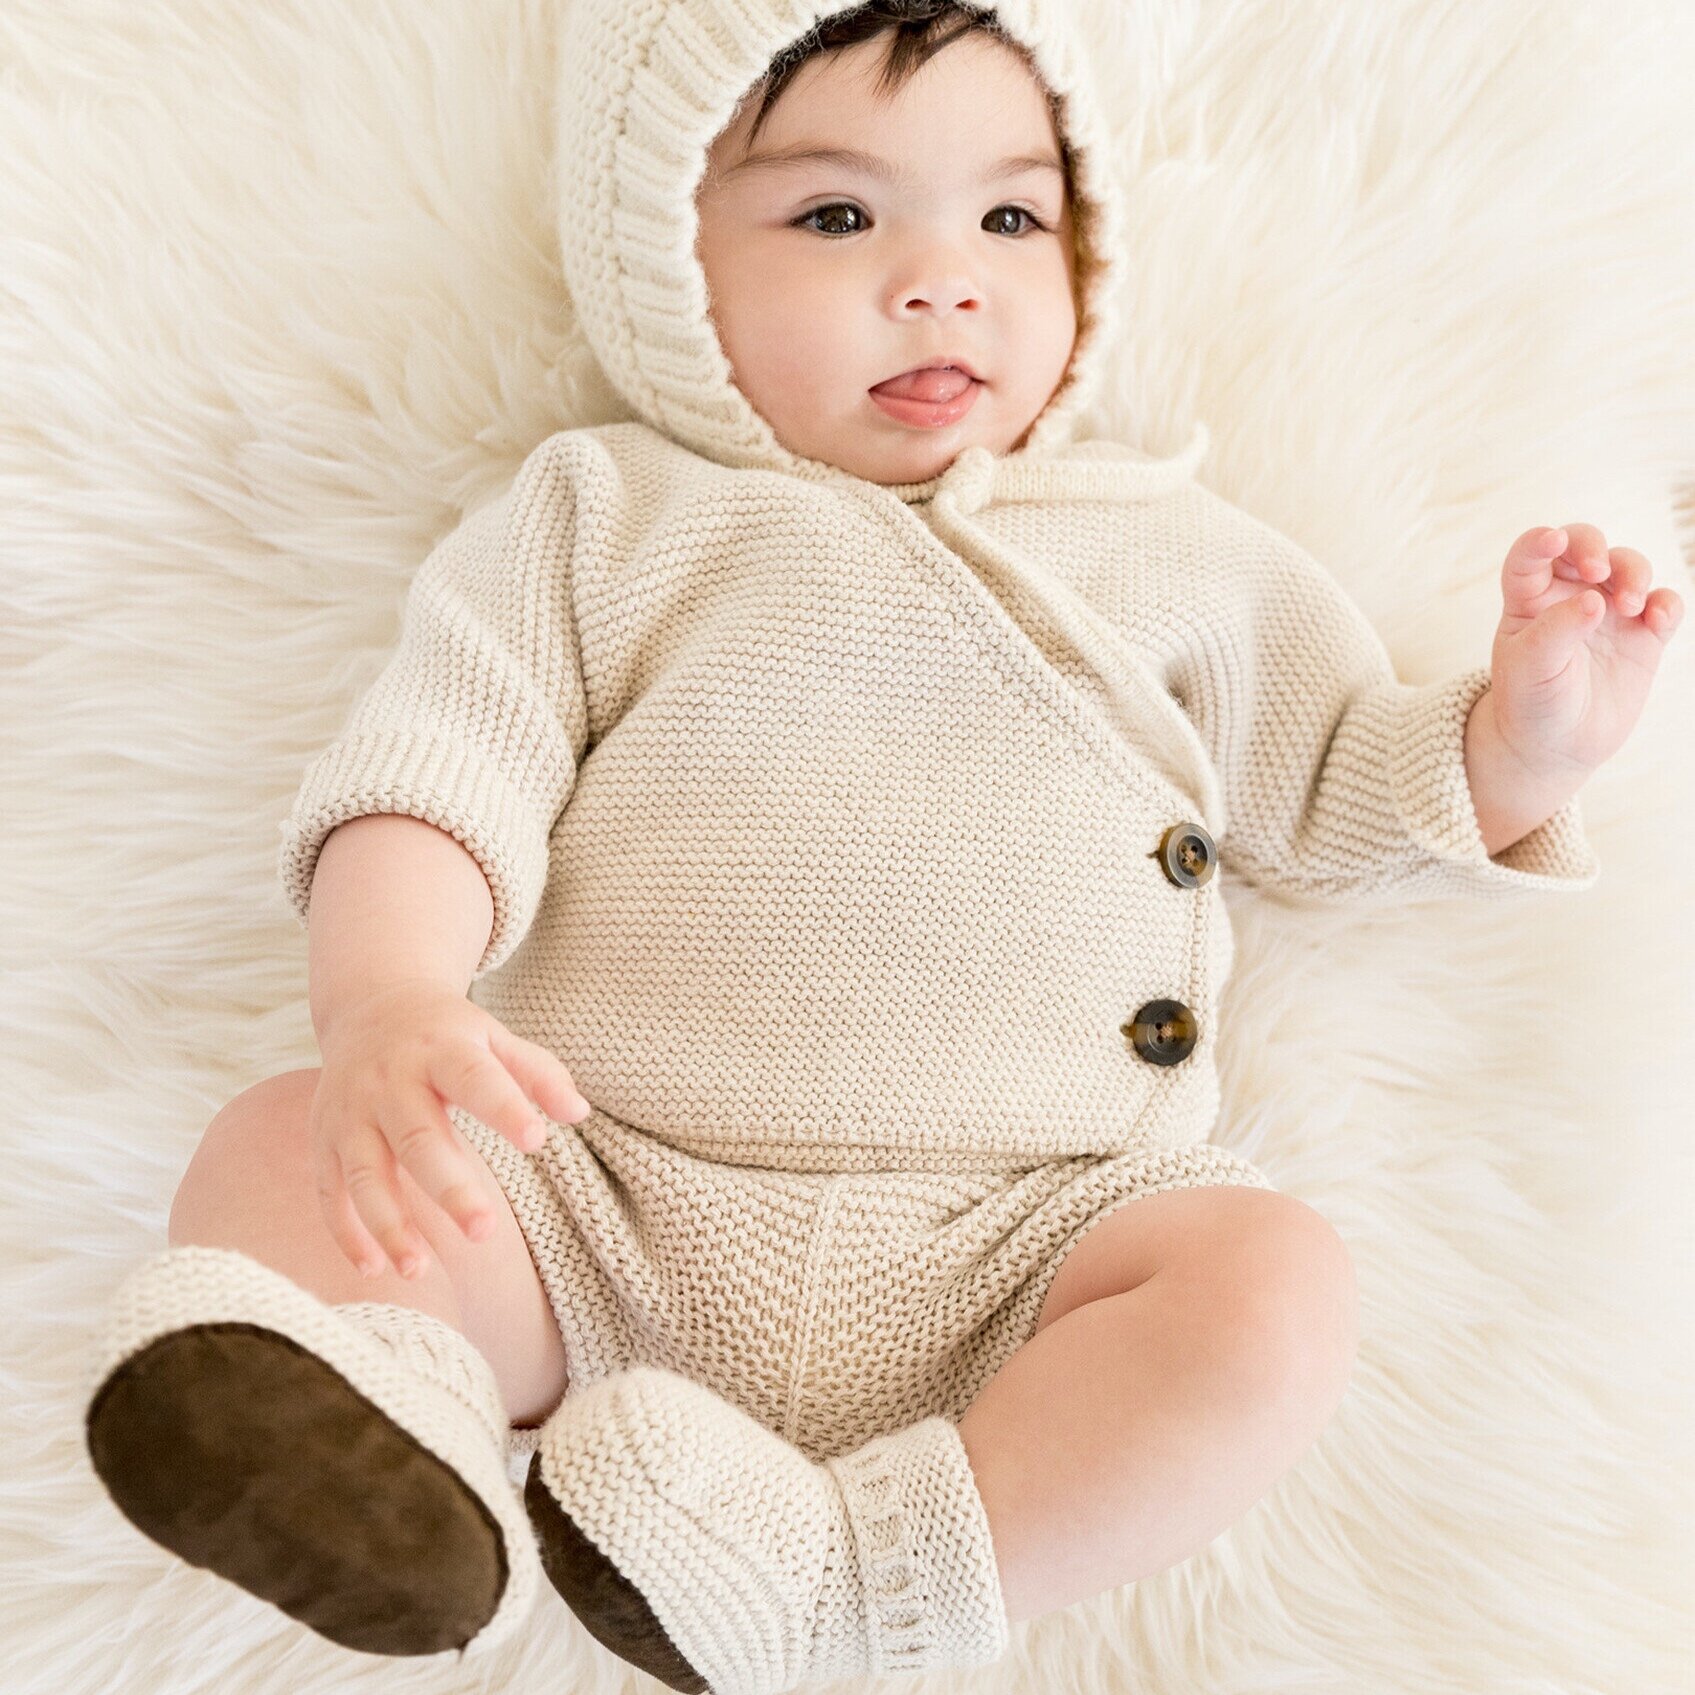 hanna-andersson-knit-baby-booties.jpg